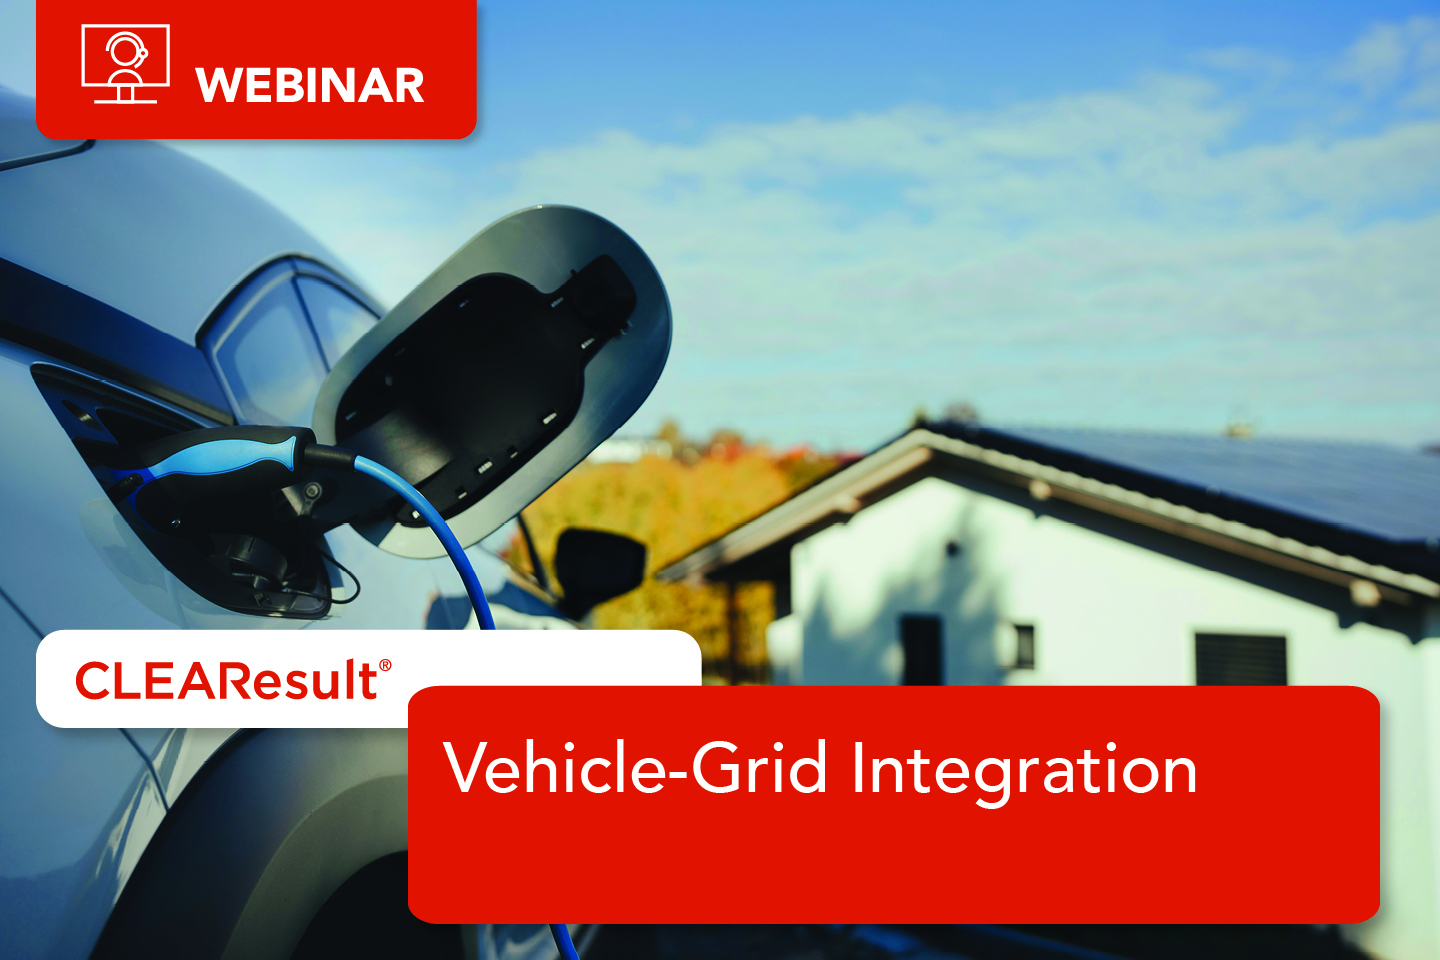 Watch our full webinar, Vehicle-Grid Integration